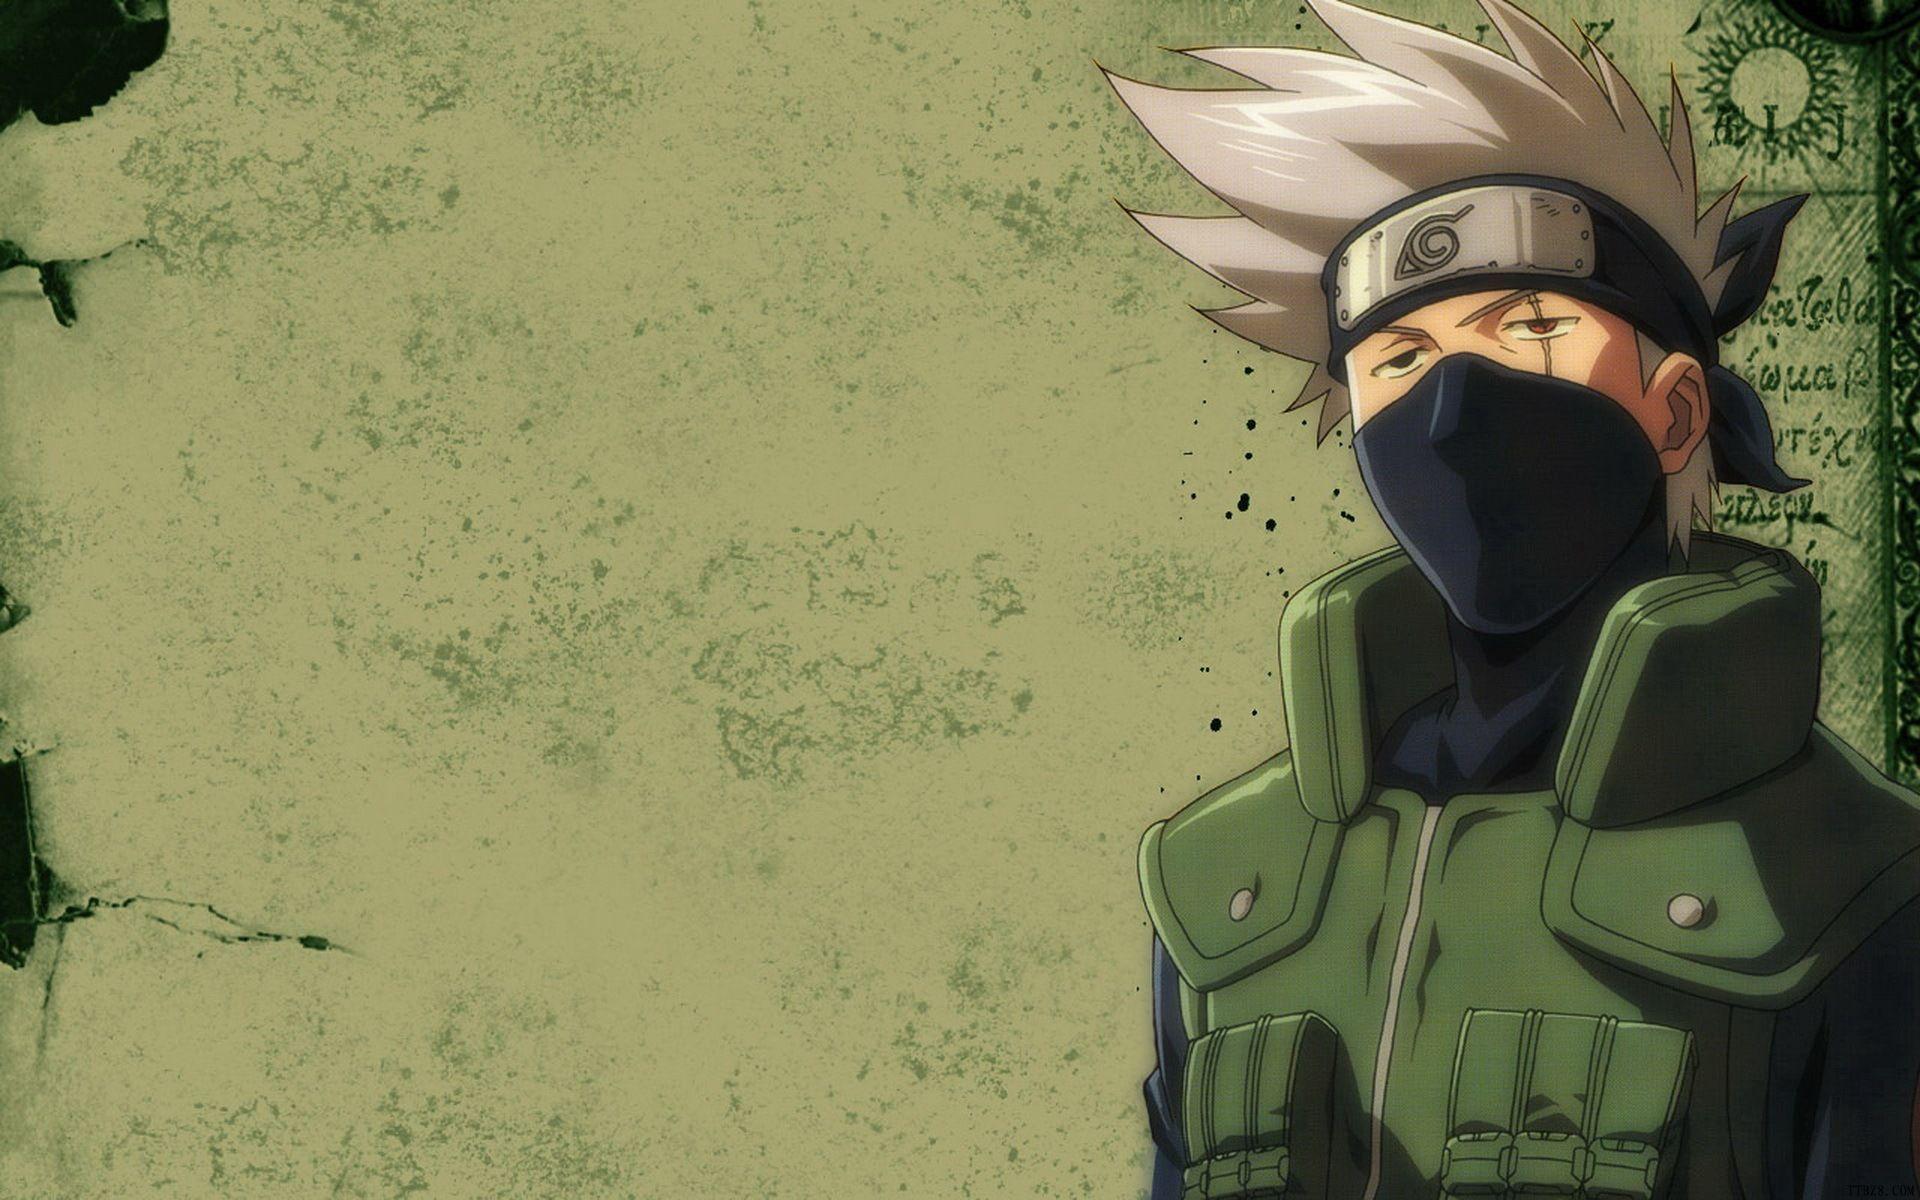 193 Kakashi Hatake Hd Wallpapers Backgrounds Wallpaper Abyss Images